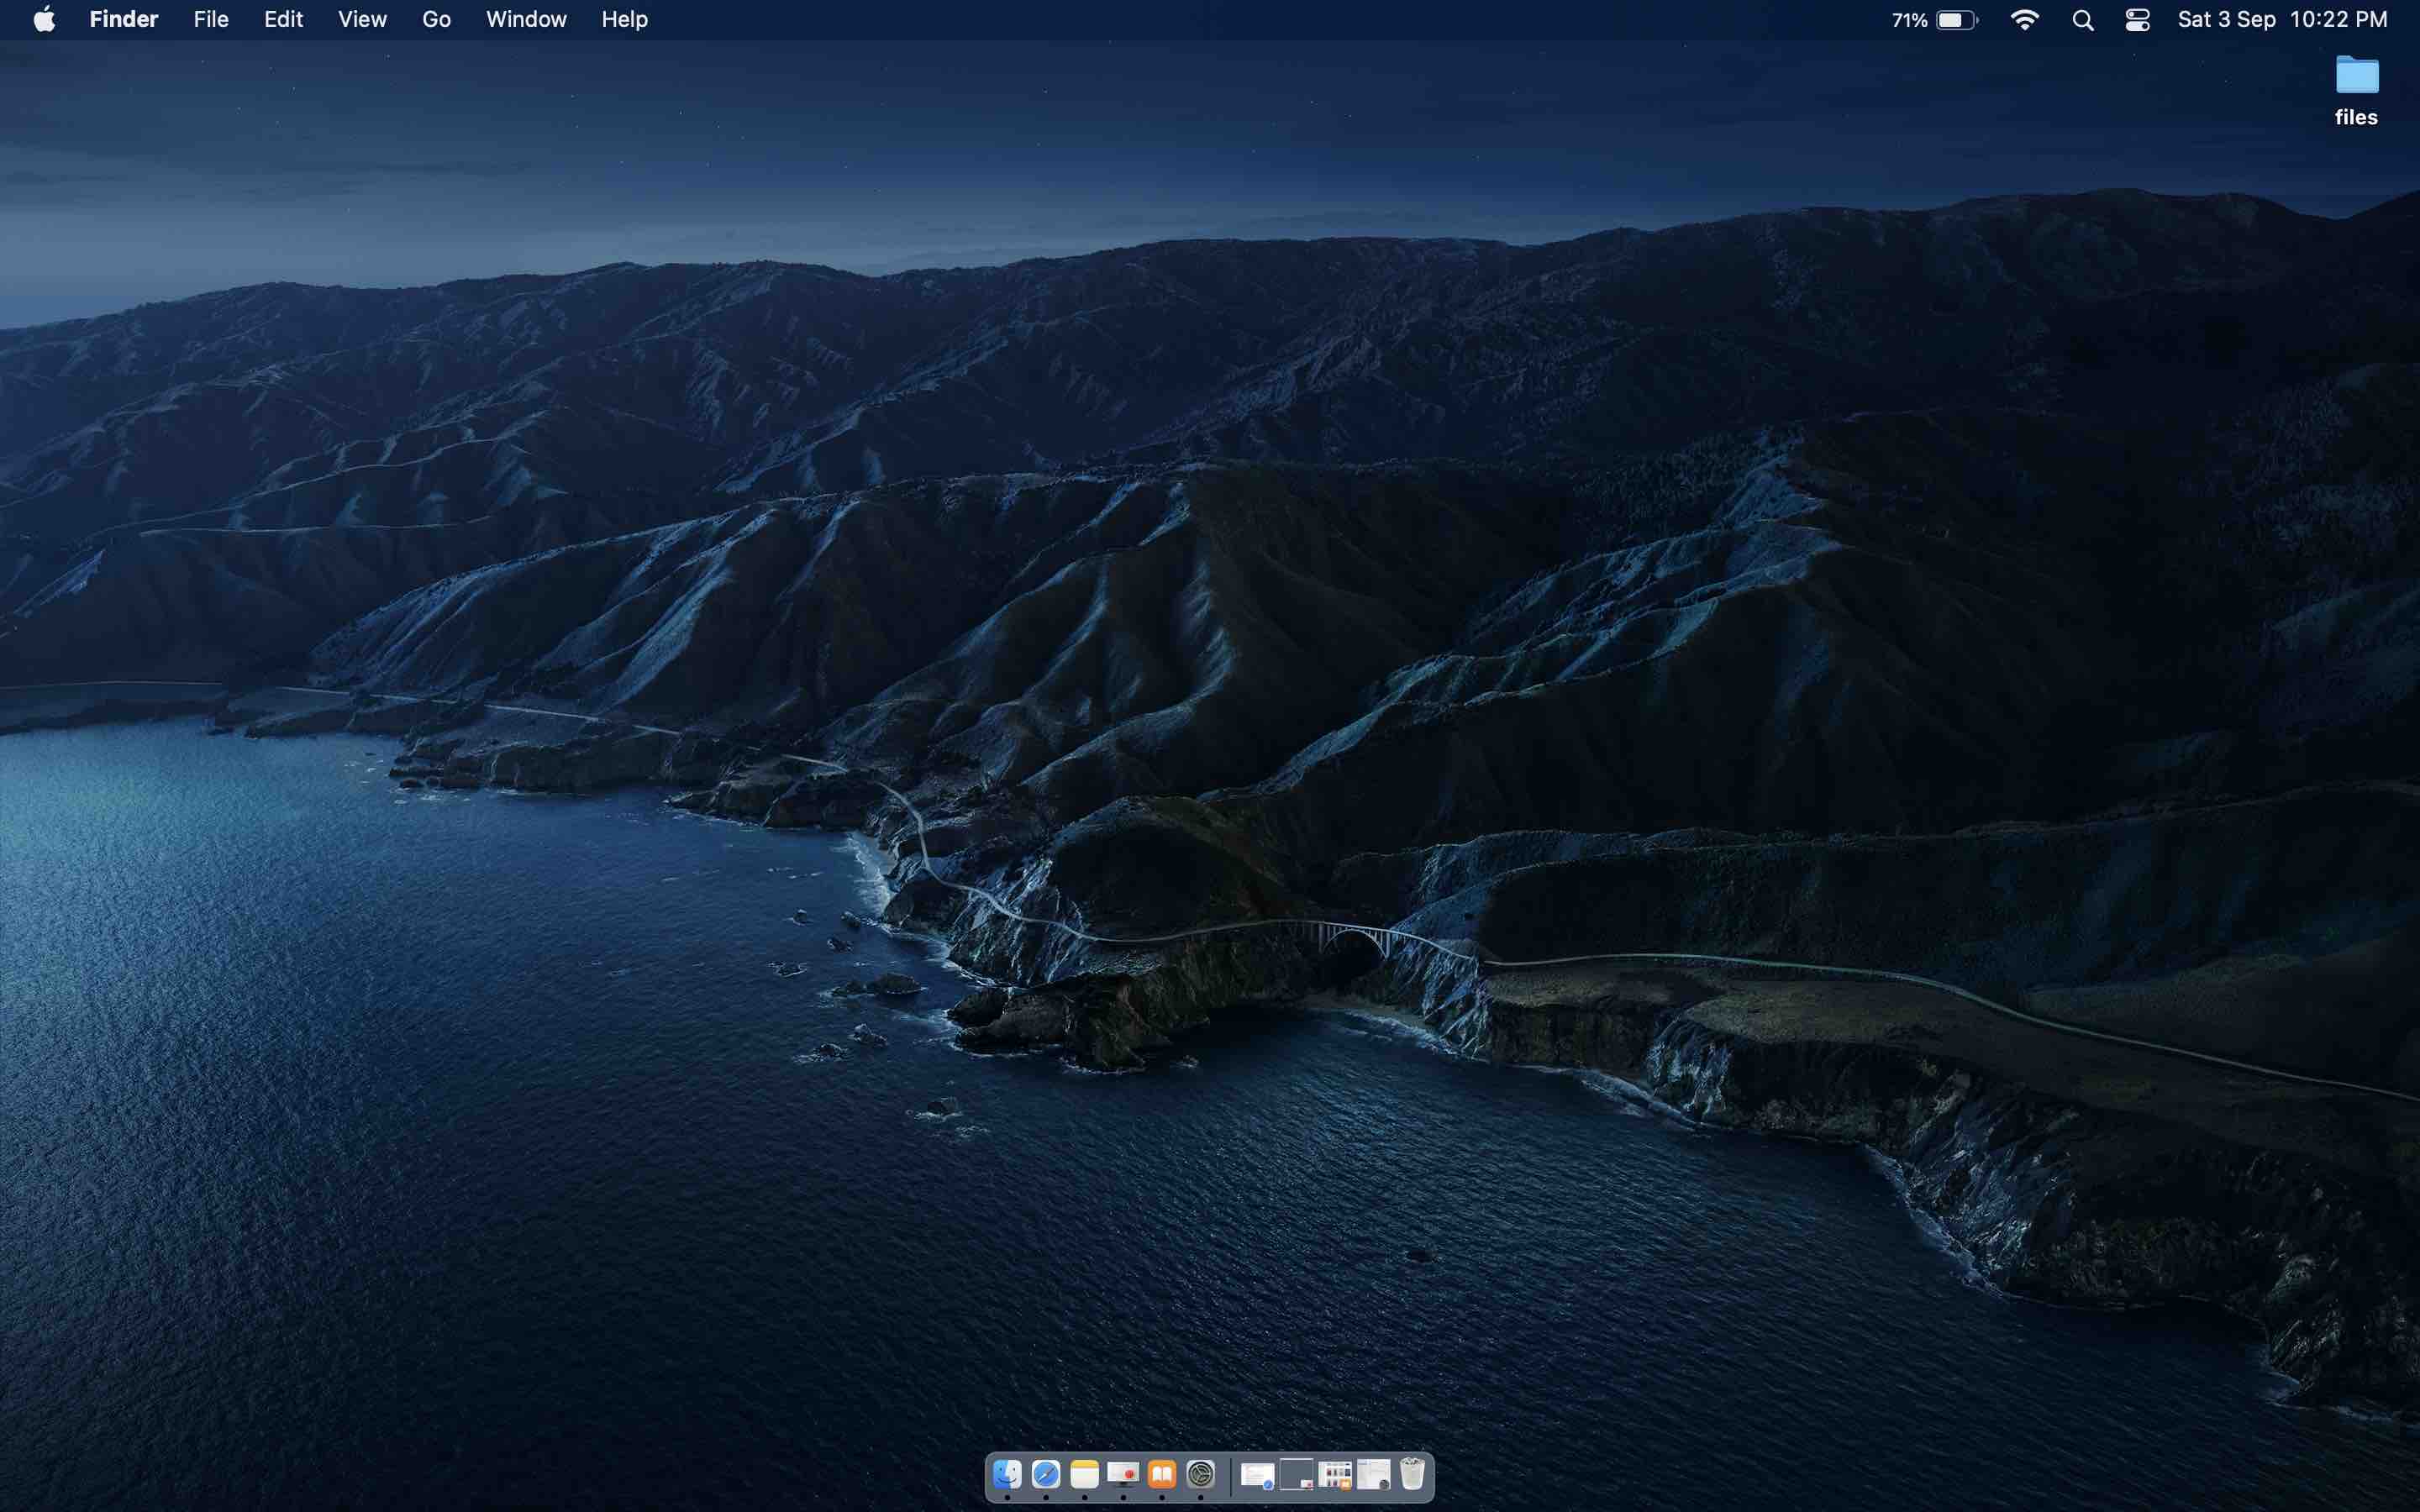 How to Set Background Wallpaper on macOS 13 Ventura